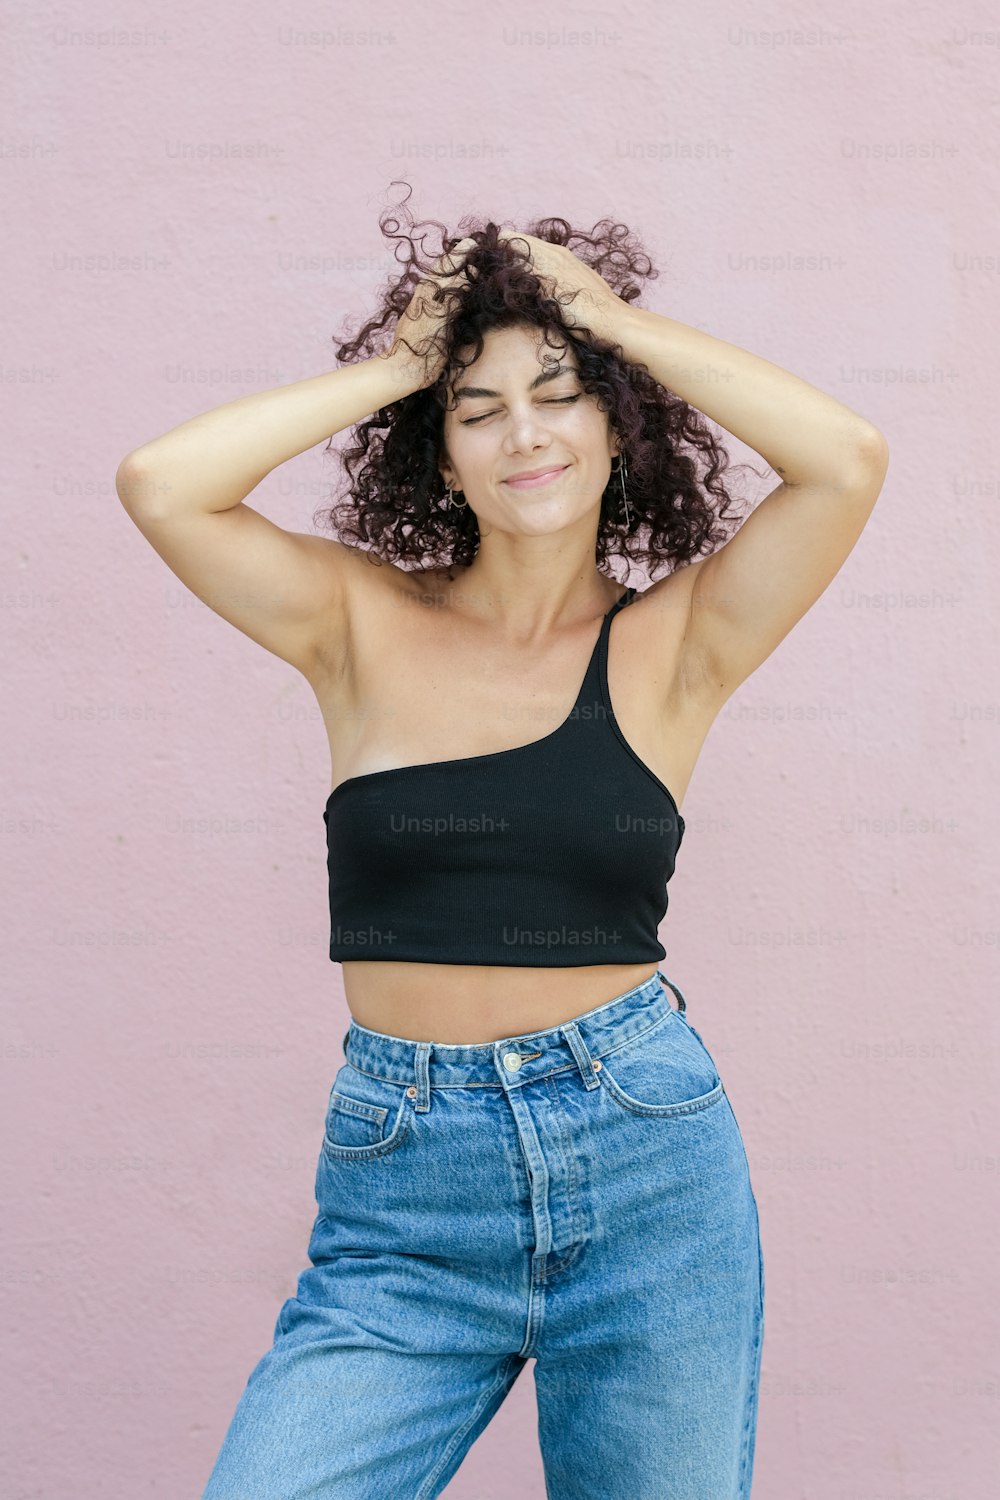 a woman with curly hair wearing jeans and a crop top